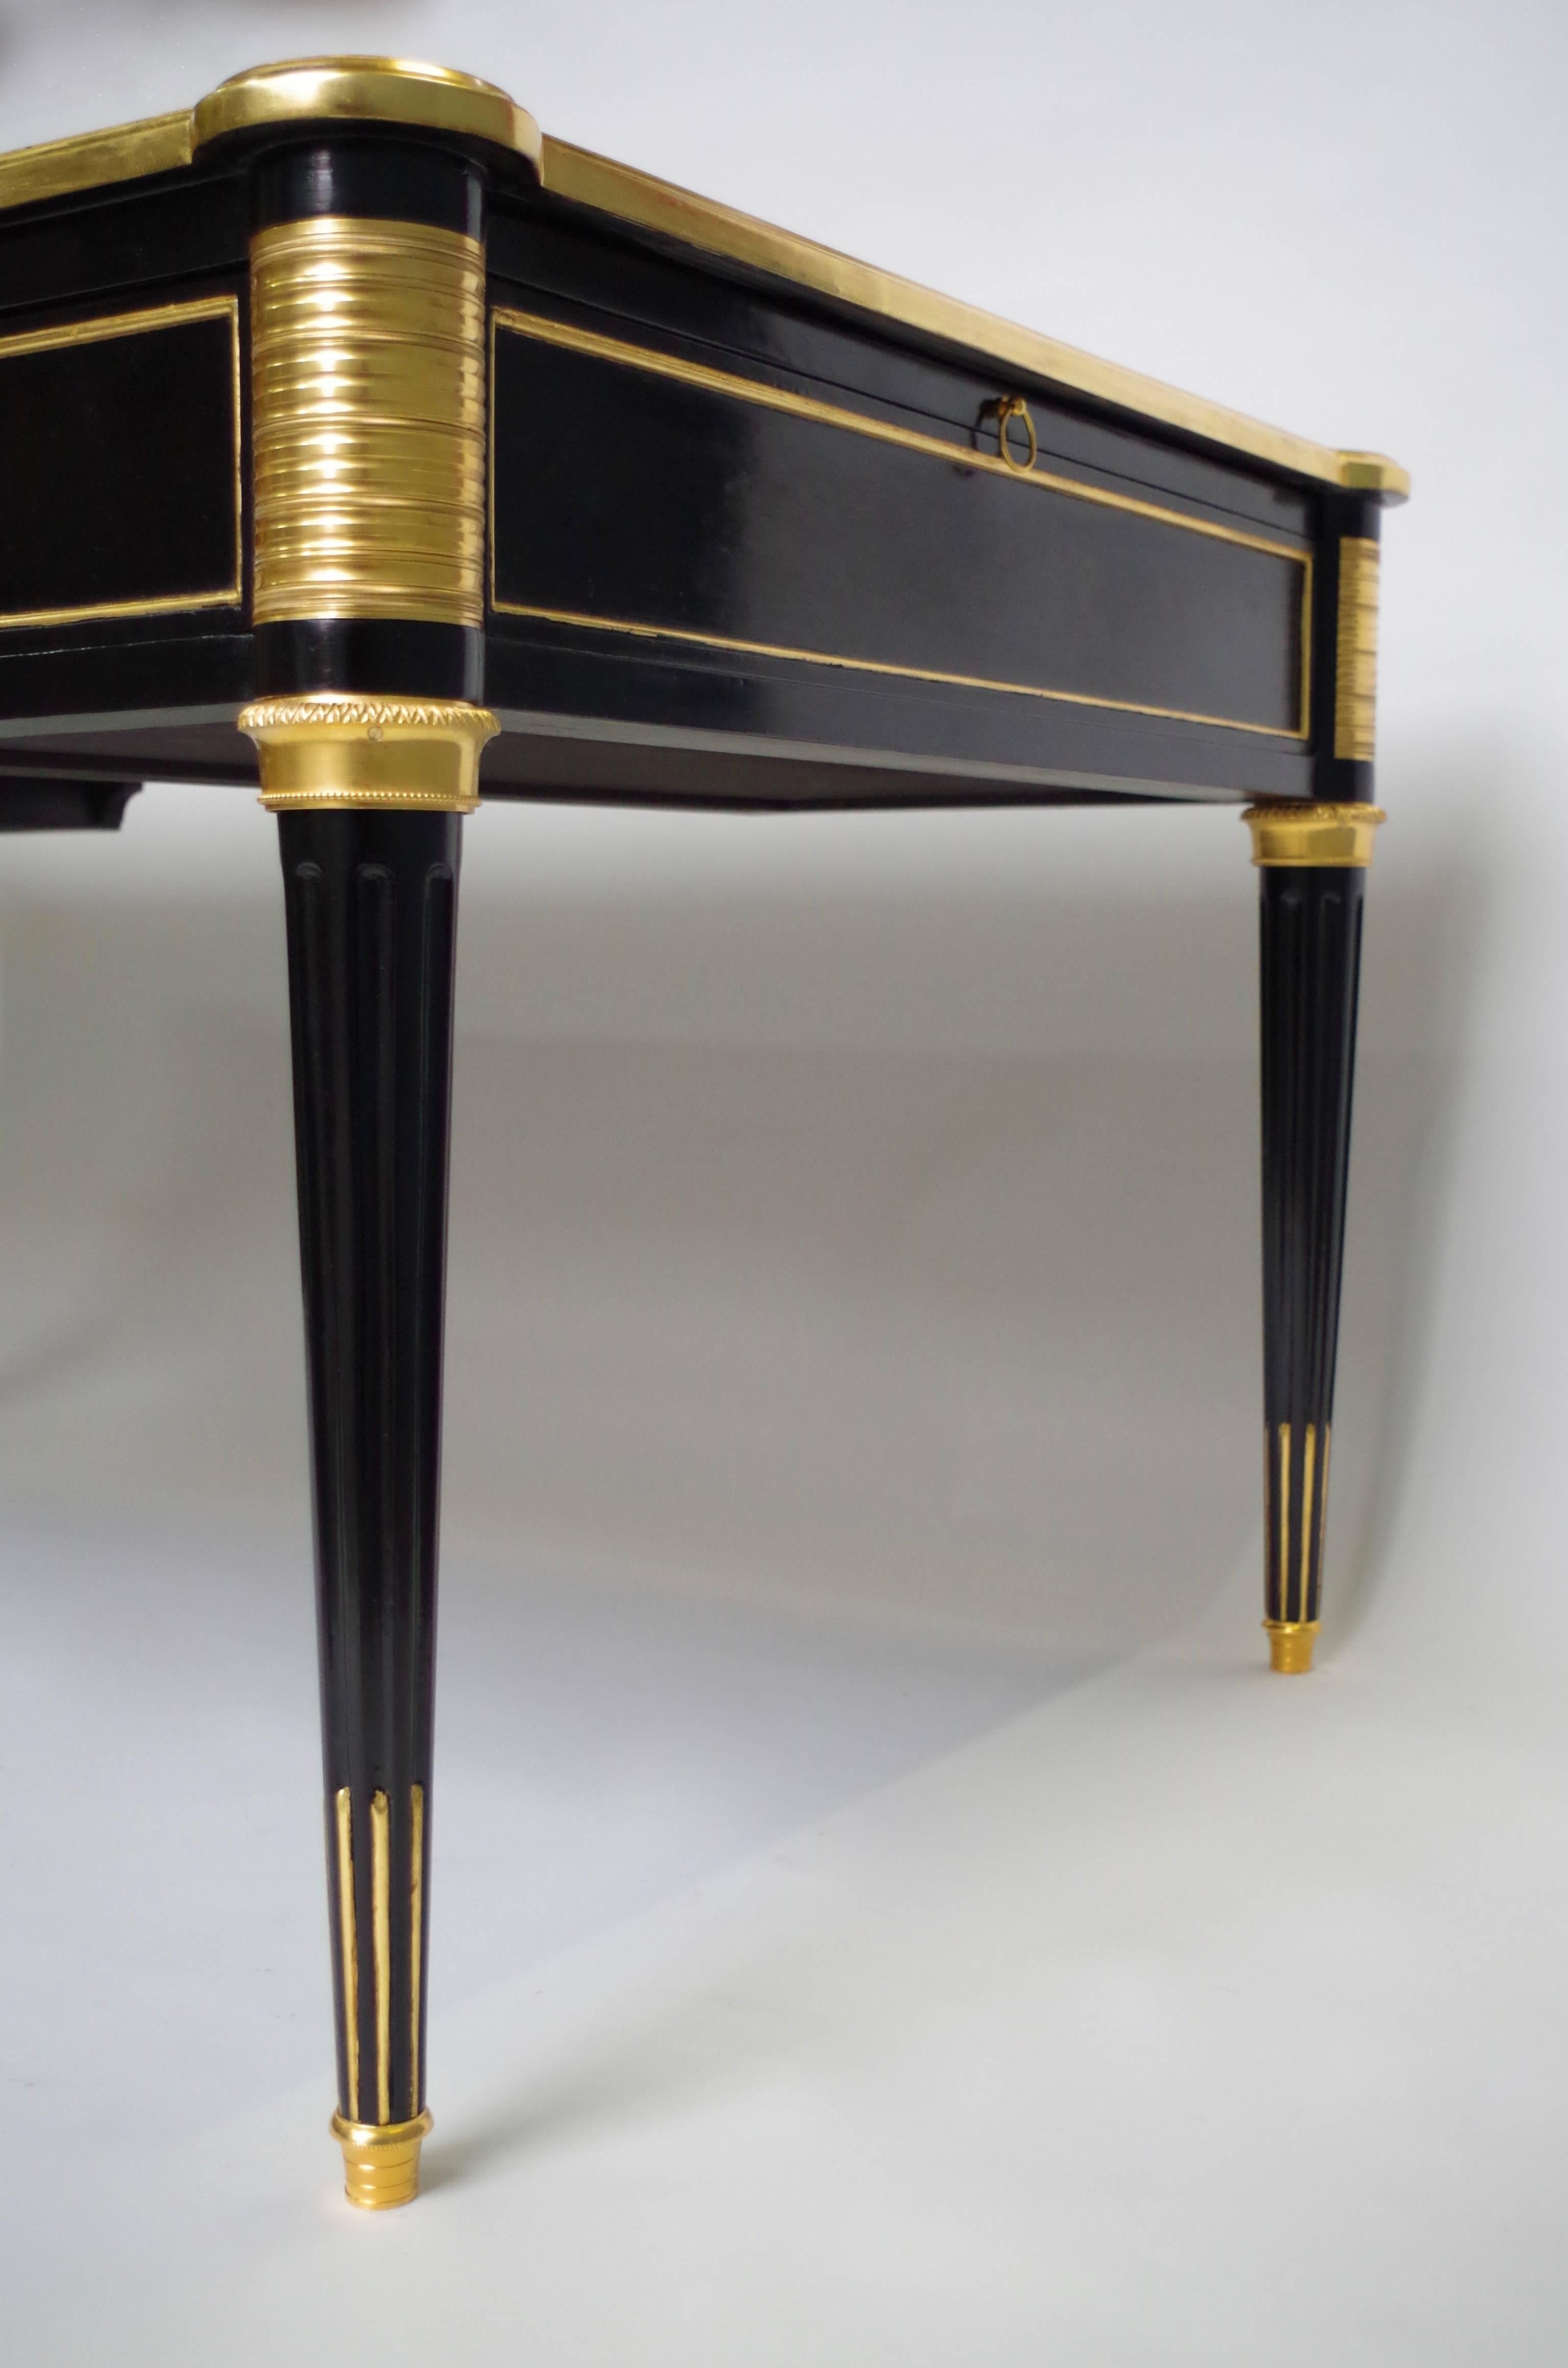 Large Louis XVI style flat desk in black lacquered mahogany gilt with golden leaf. Model with two writing-slides and standing on four fluted legs ending with a gilded shoe.
Three drawers on his apron, adornated with gilded bronzes on angles and